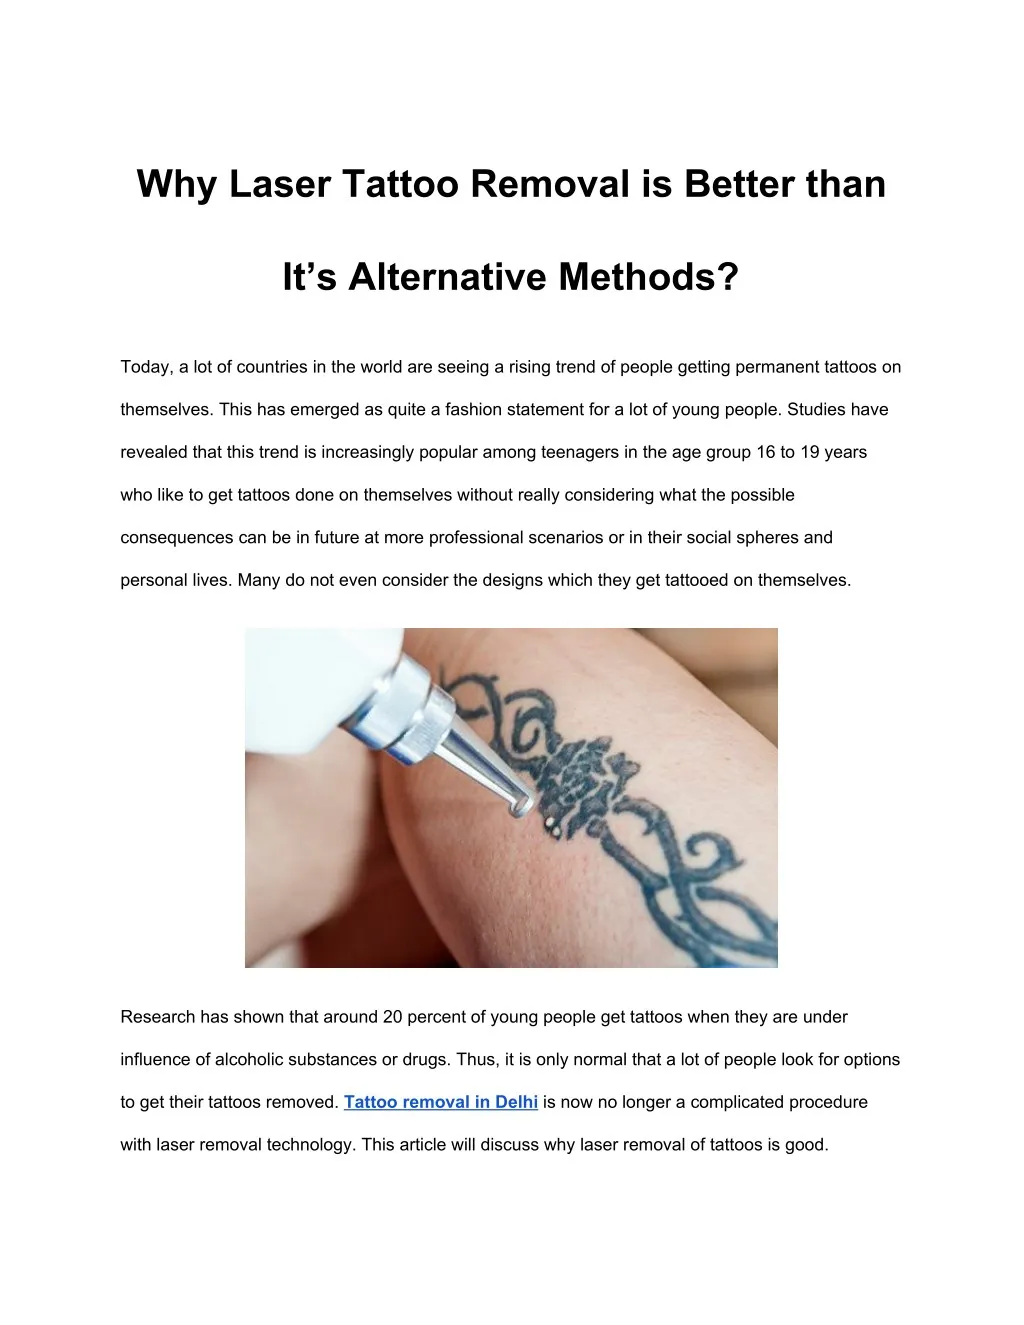 why laser tattoo removal is better than